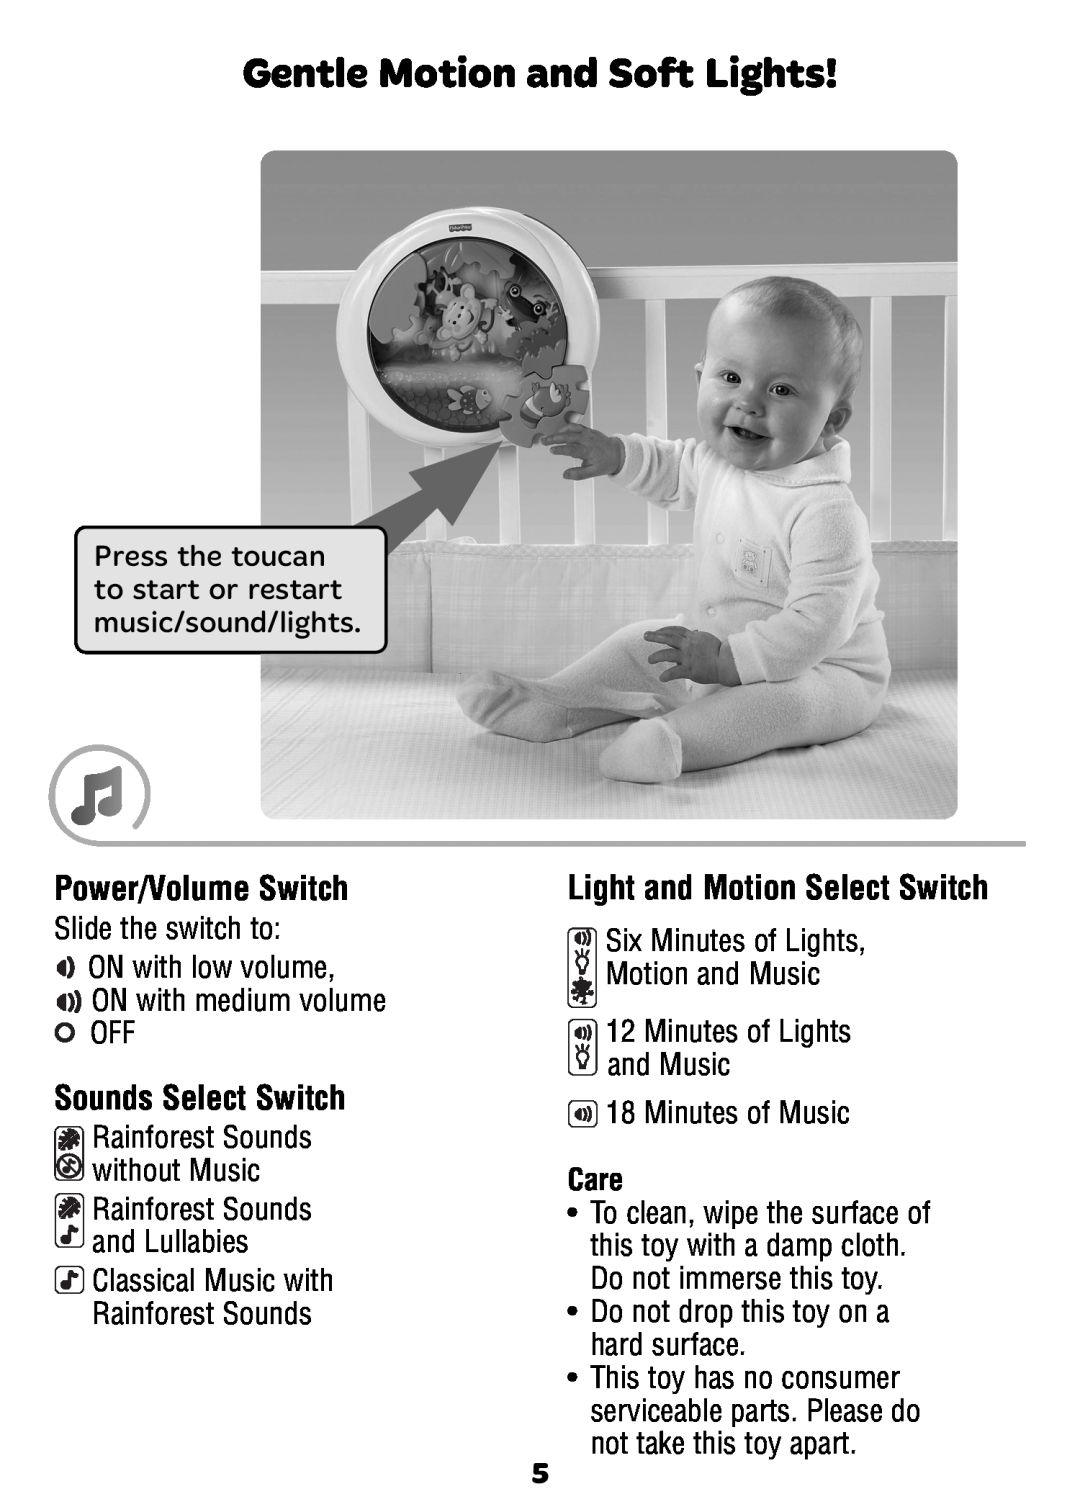 Fisher-Price K3800 instruction sheet Gentle Motion and Soft Lights, Care, Power/Volume Switch, Sounds Select Switch 